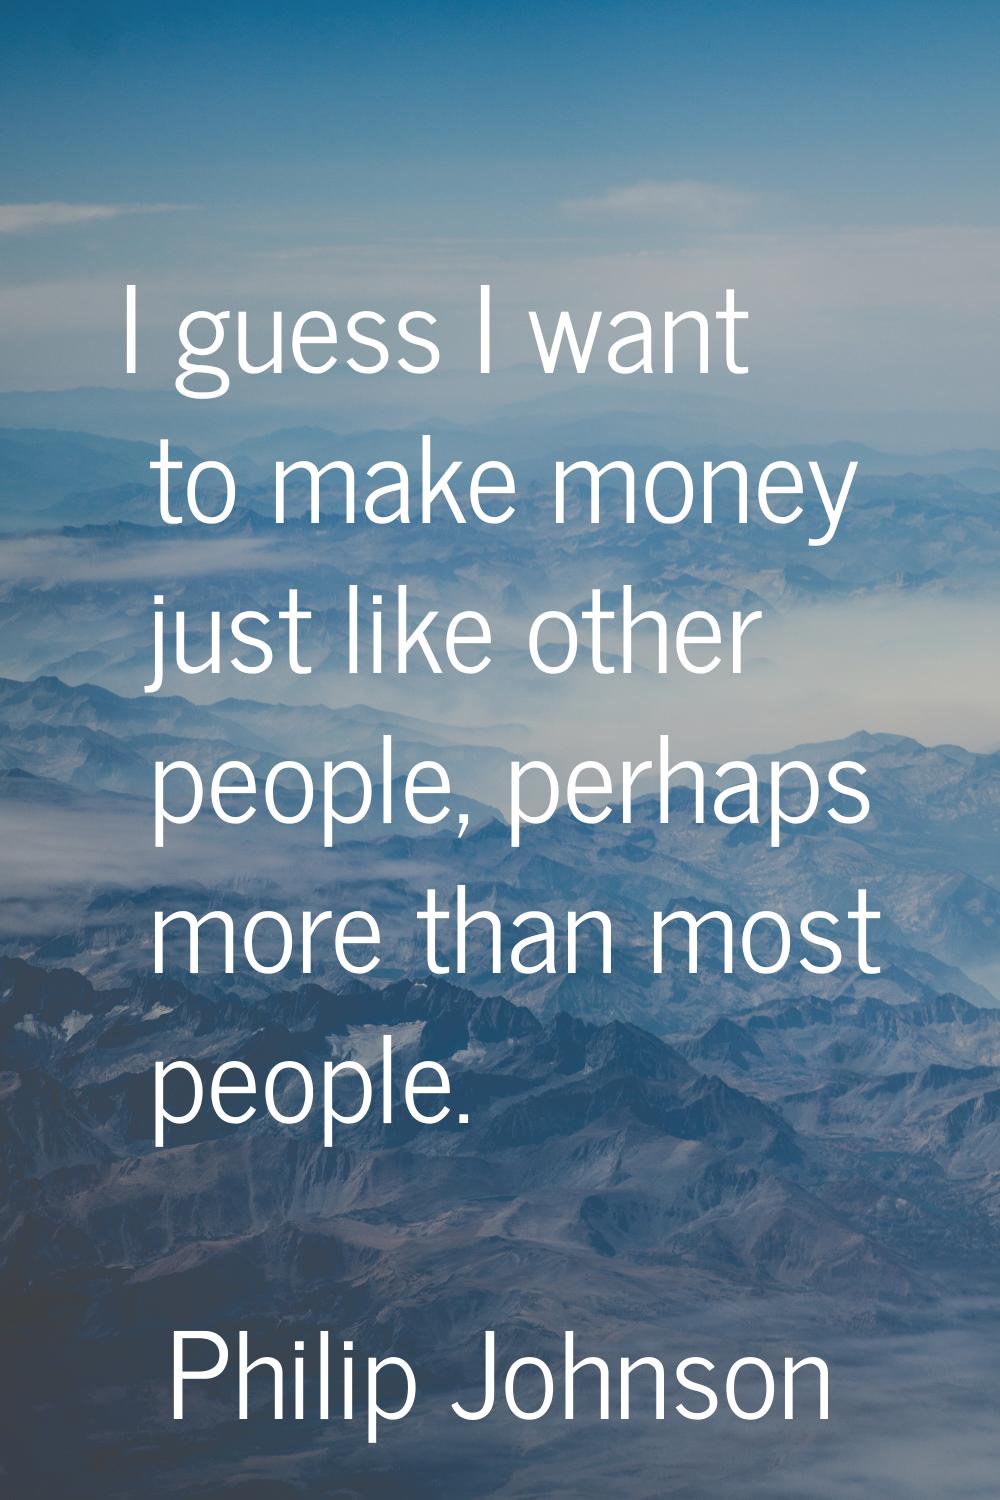 I guess I want to make money just like other people, perhaps more than most people.